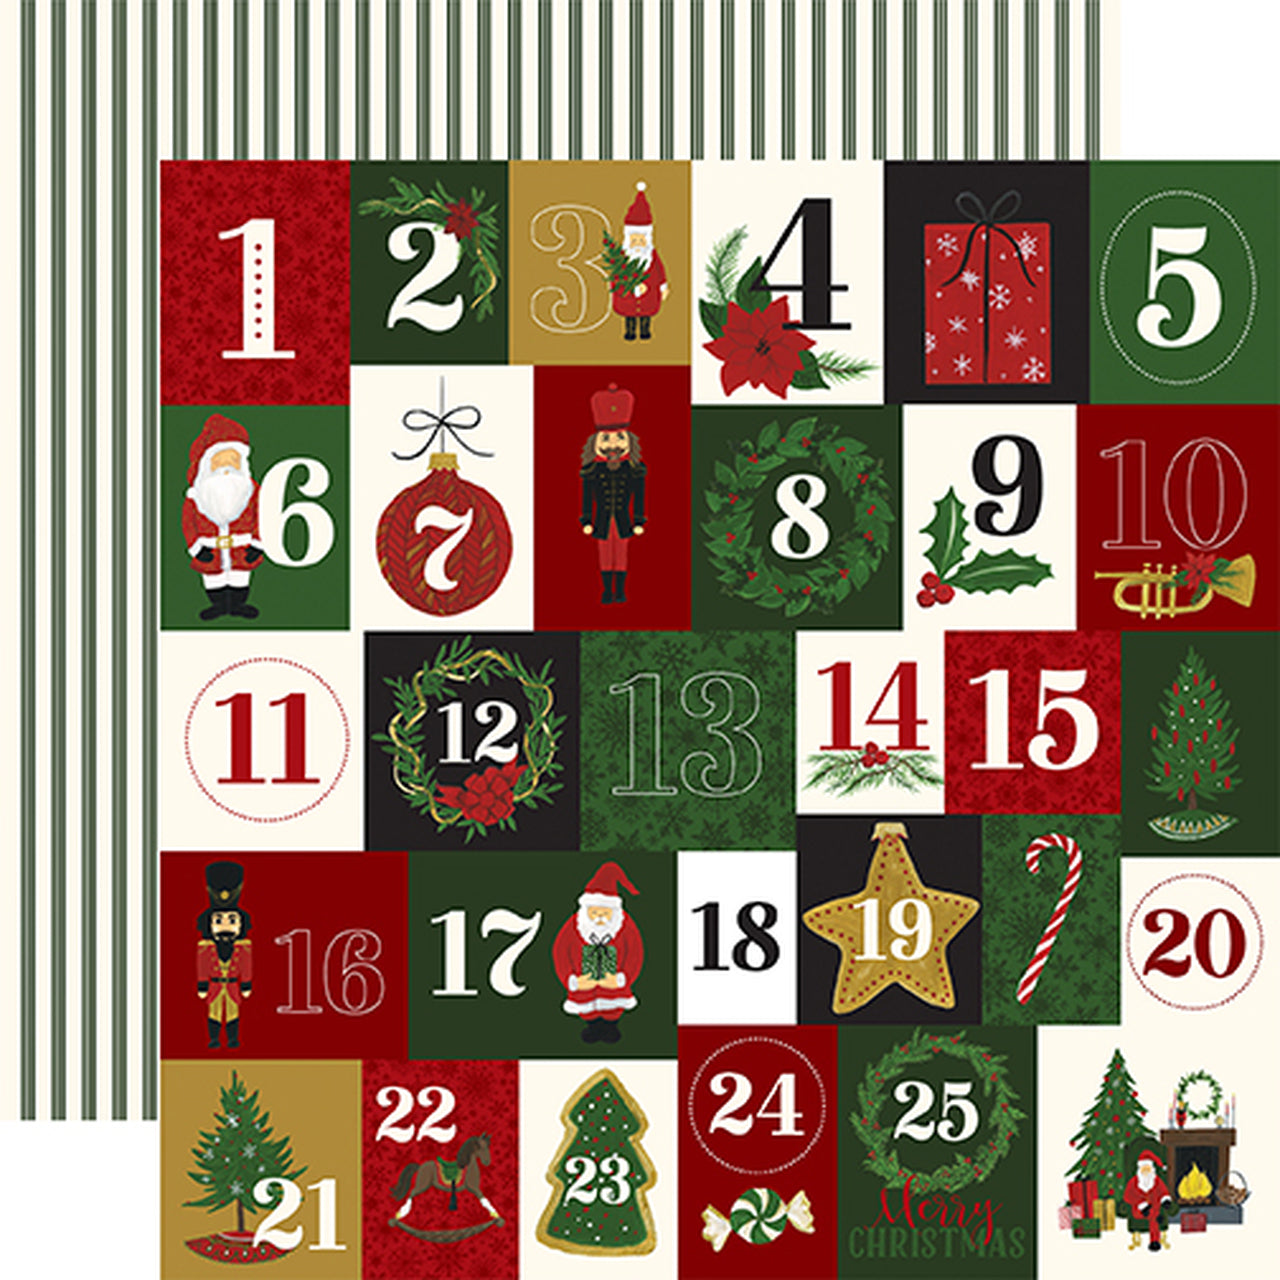 Twenty-Five Days - double sided sheet. (Side A - 25  symbols of Christmas on advent-style numbered squares, Side B - dark green triple stripes on ivory background)